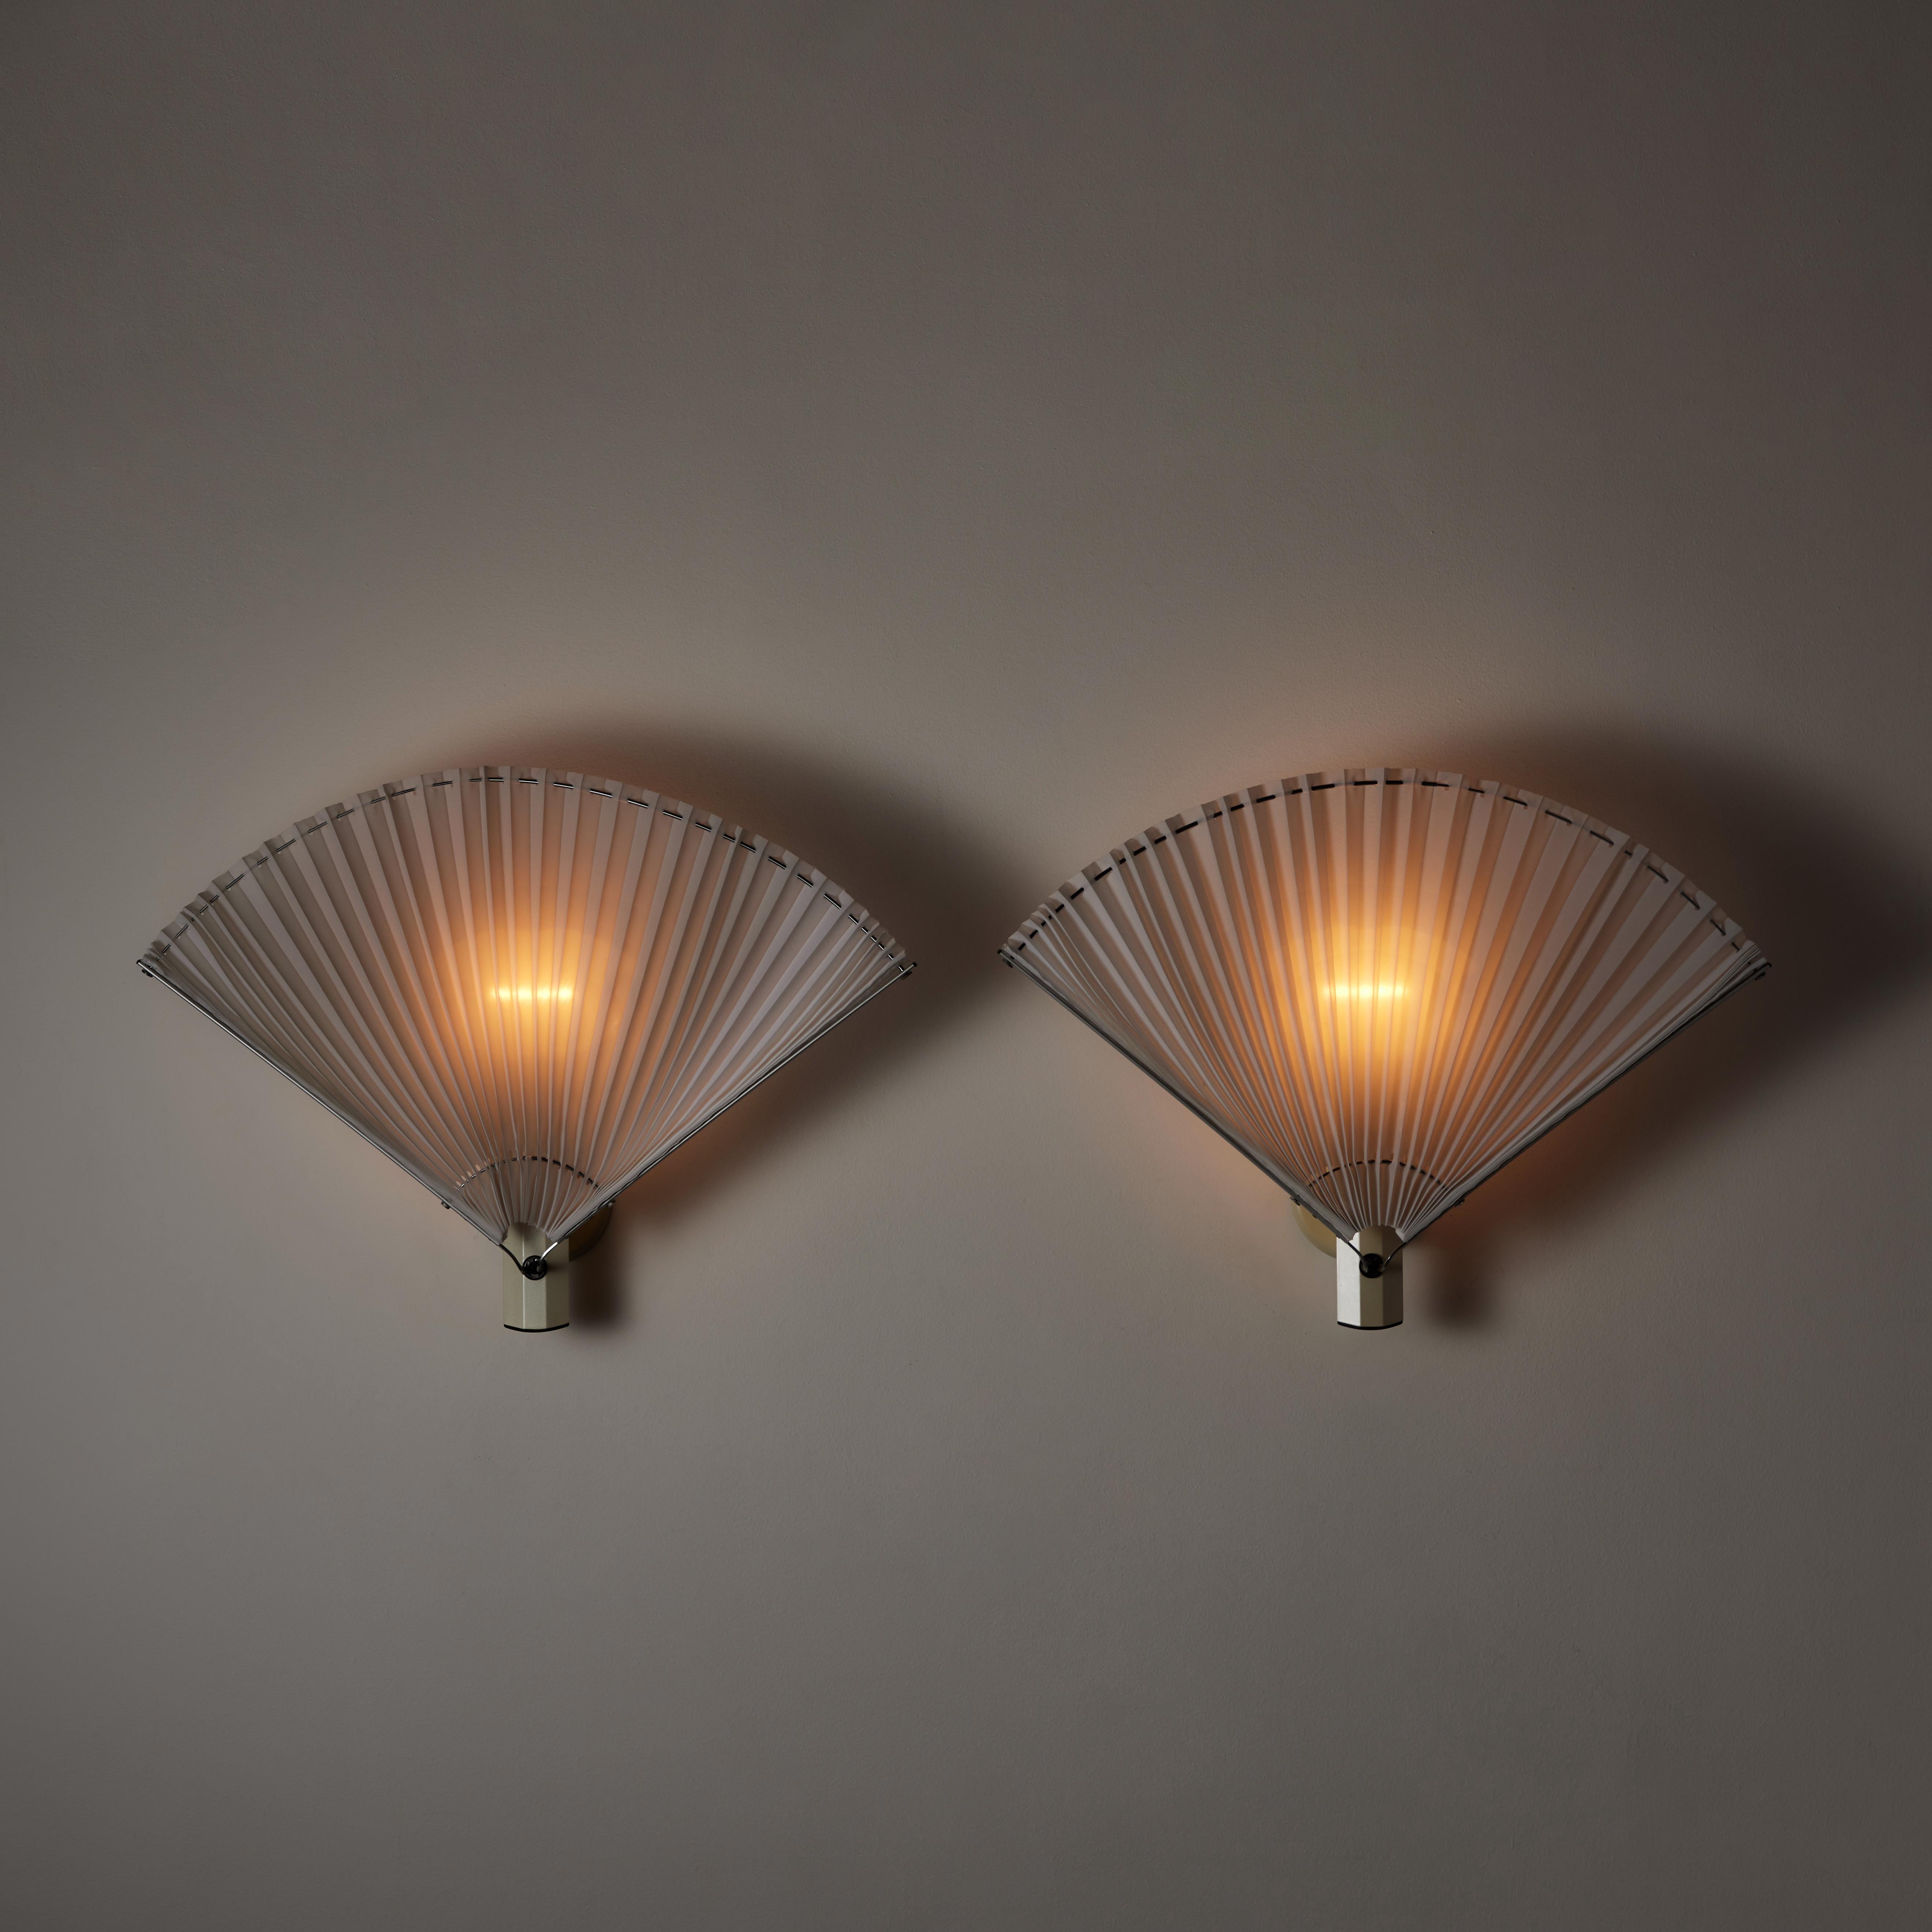 Pair of ‘Butterfly’ sconces by Afra and Tobia Scarpa for Flos. Designed and manufactured in Italy, circa the 1980s. Cast Iron, metal, fabric, textured glass diffuser. Rewired for U.S. standards. Retains original manufacturer's stamp. We recommend